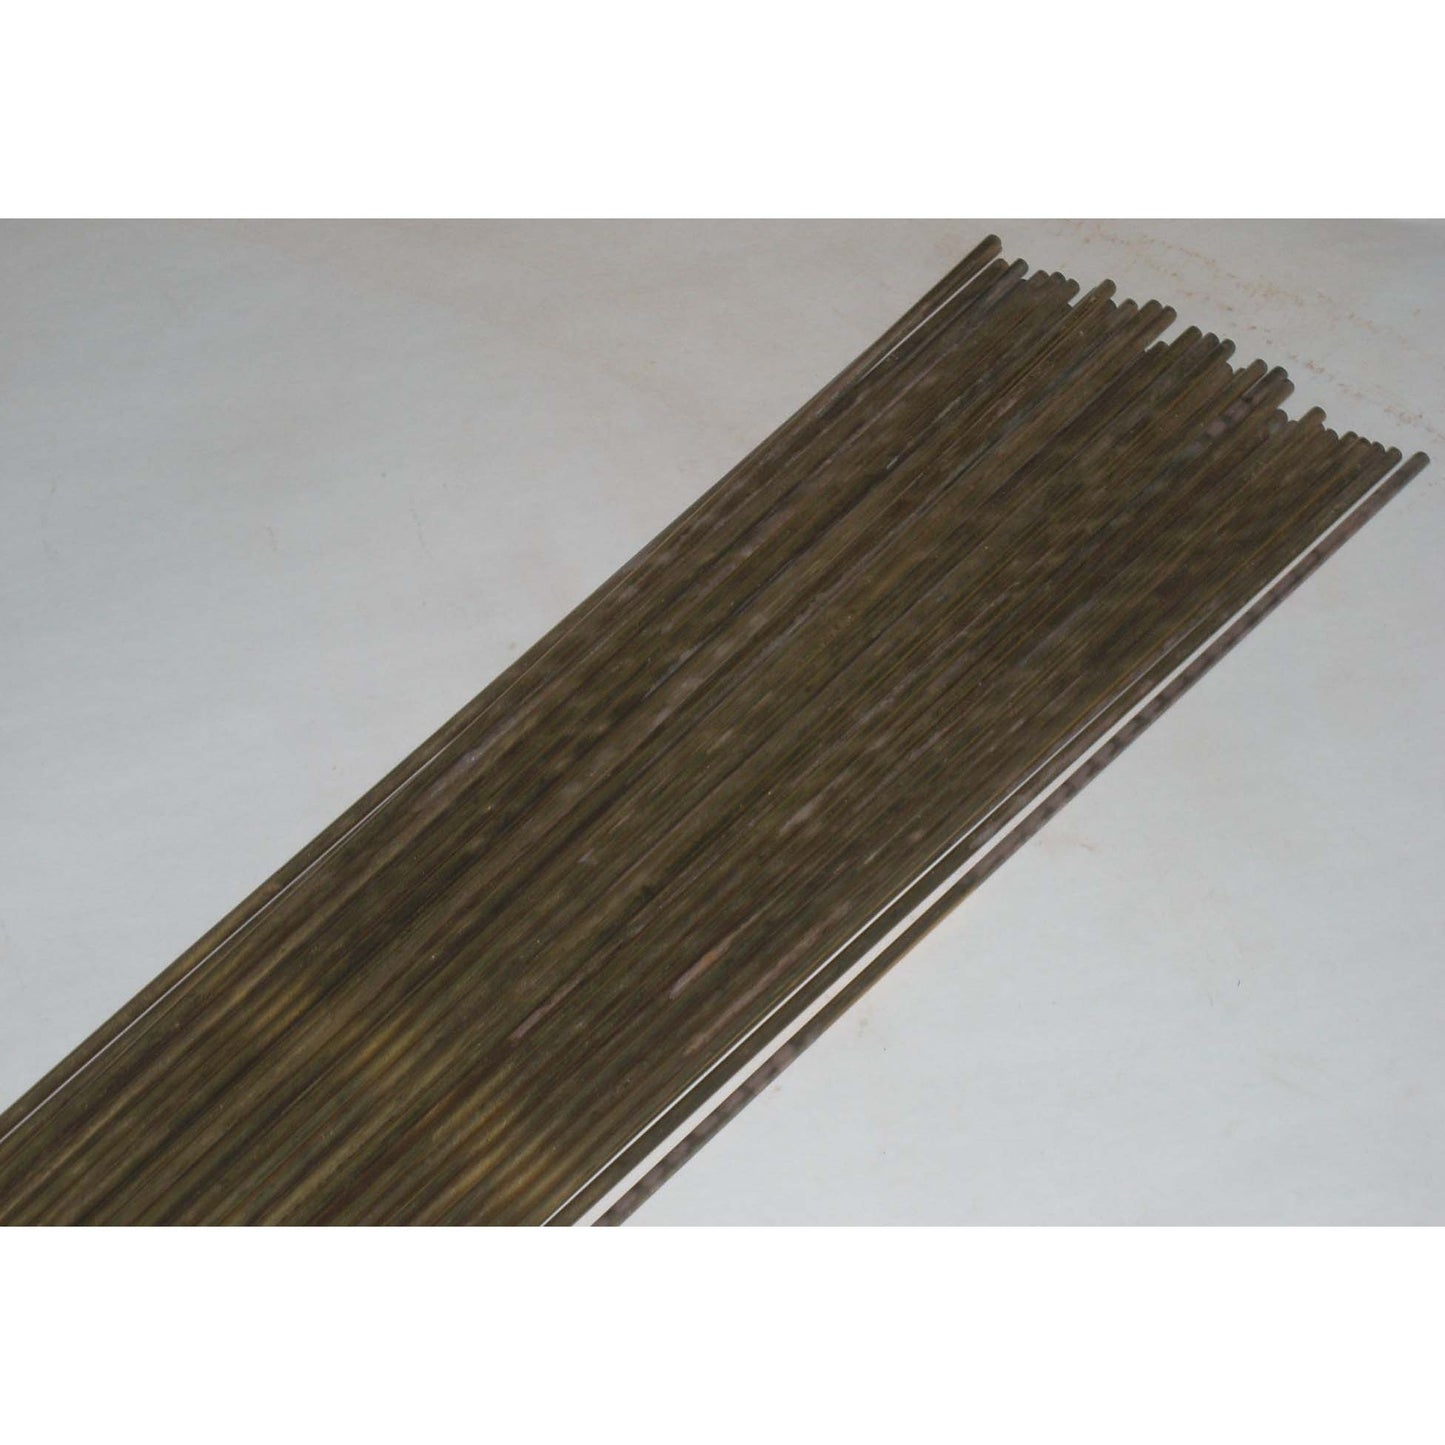 Techniweld Low Fuming Bronze 1/8 x 36 Bare Brazing Rods 6.64 lbs - Old Stock